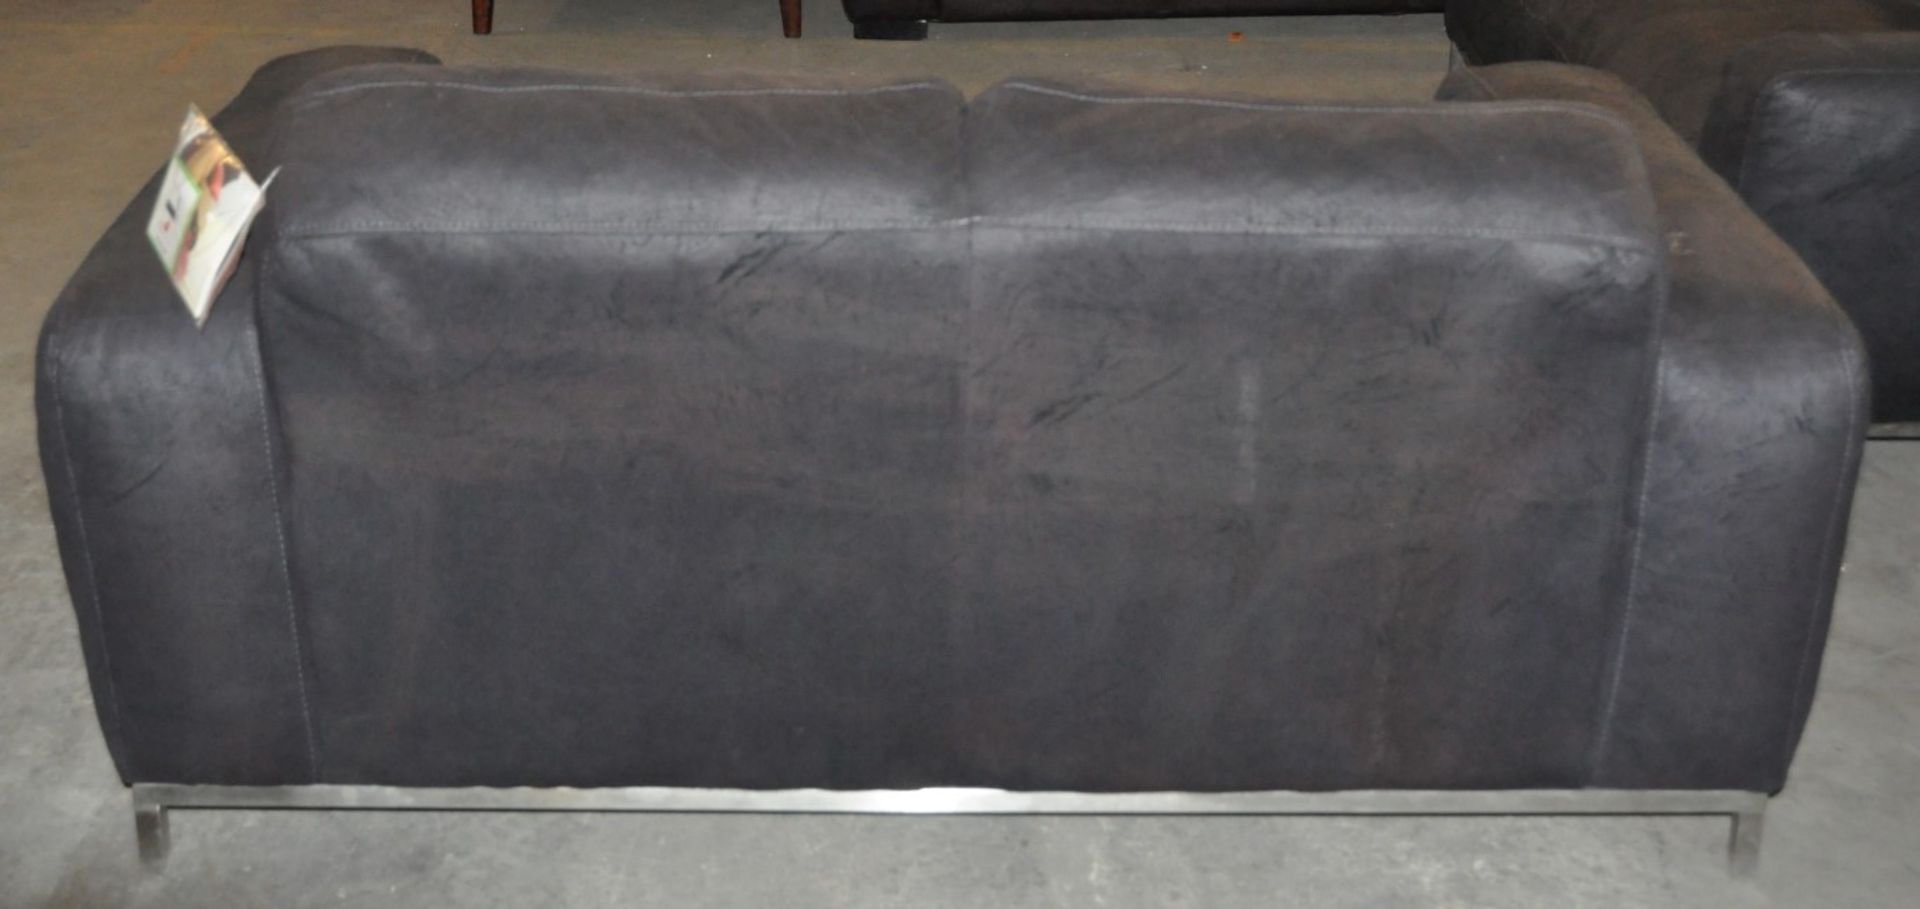 1 x 'Valletta' 3 & 2 Seater Sofa in a Black Crackle Fabric – Ex Display - Dimensions (2 Seater) - Image 6 of 6